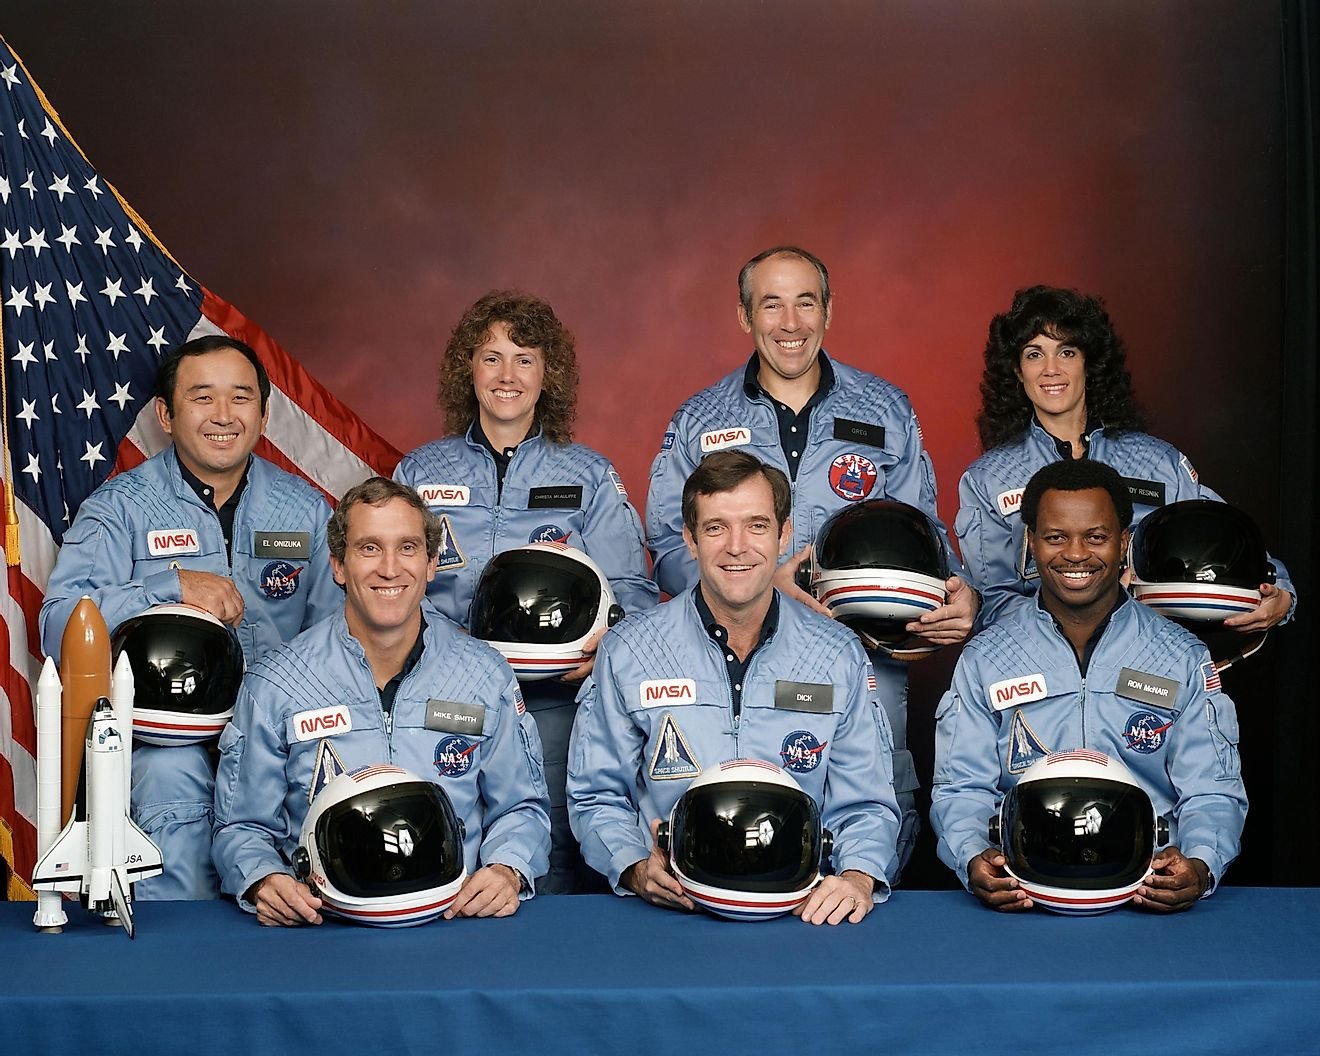 10 Reasons The Challenger Disaster Is So Historical